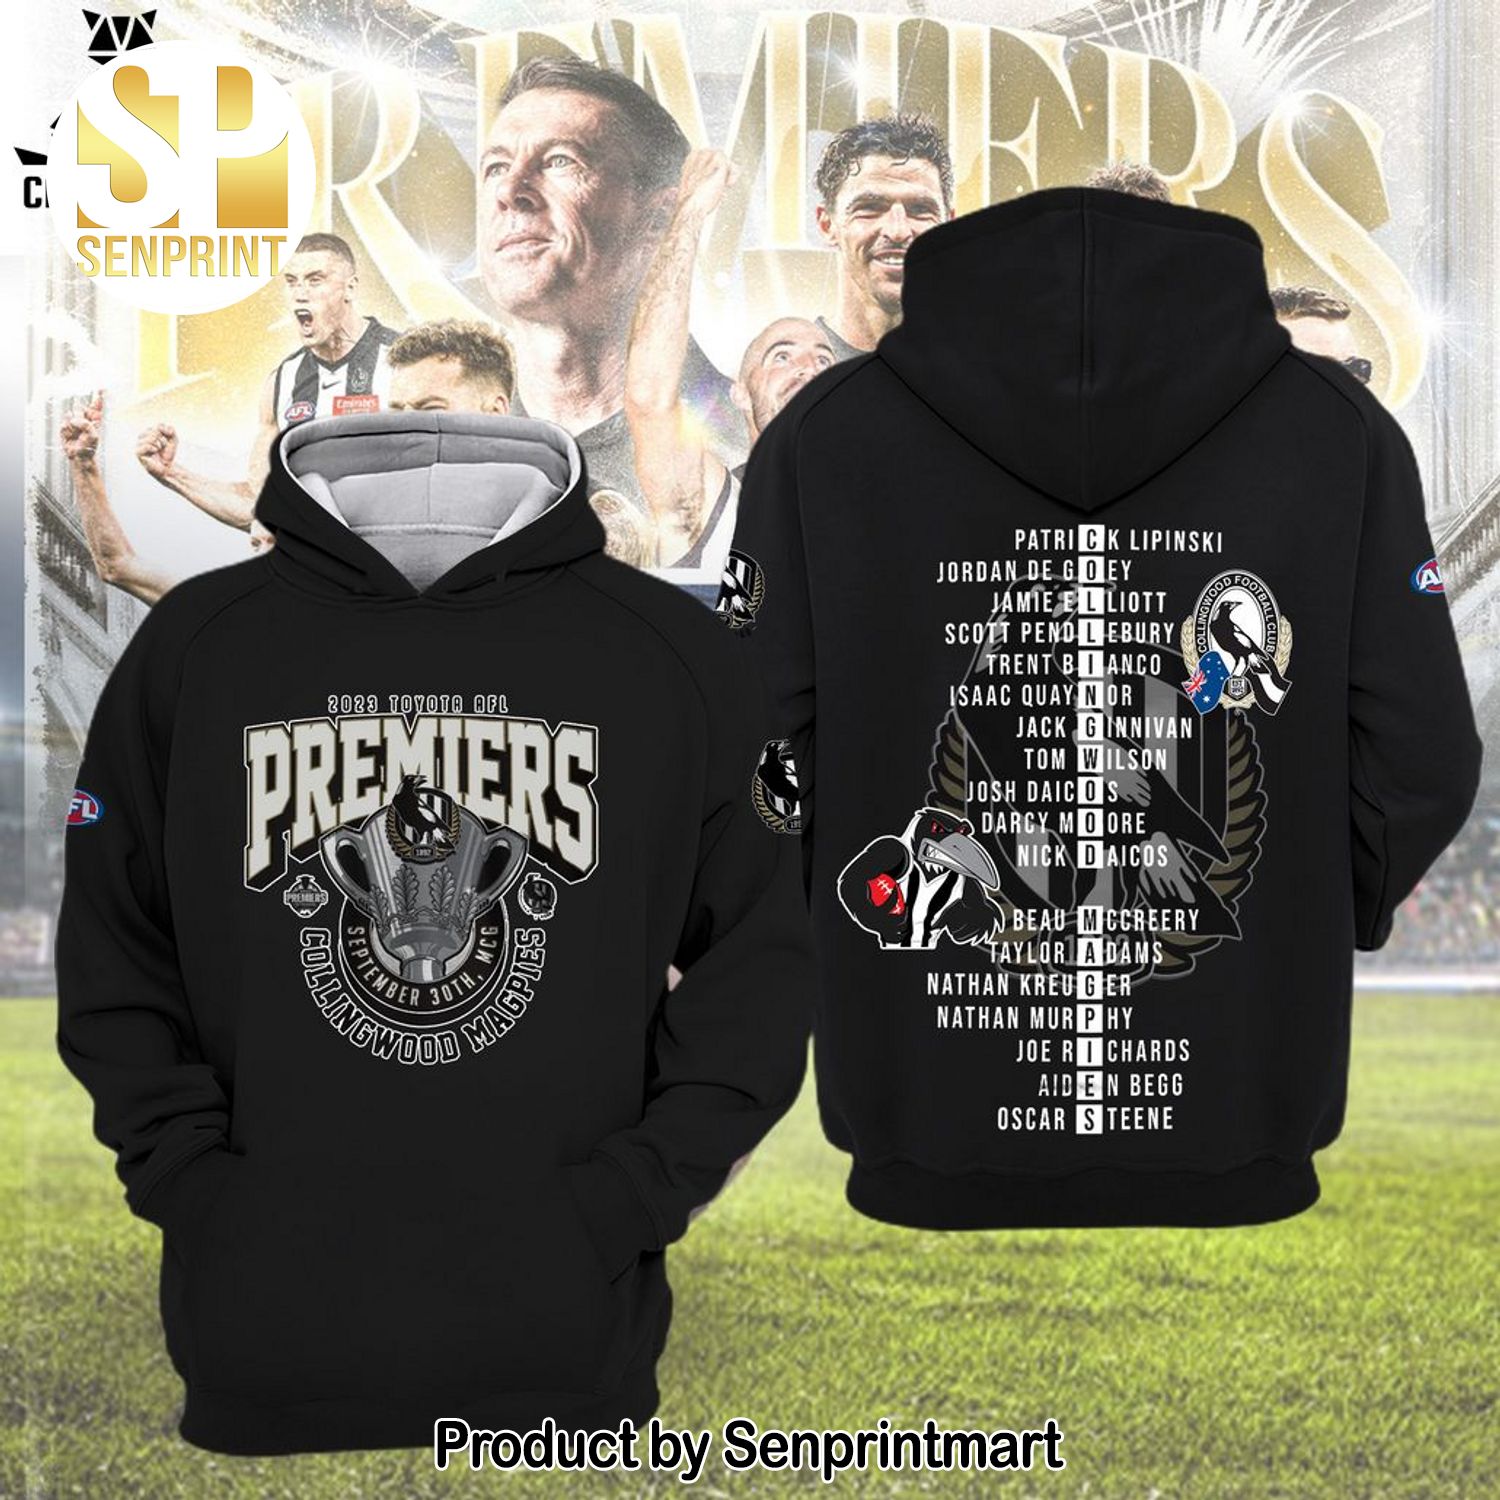 2023 Toyota AFL Premiers September 30th MCG Collingwood Magpies Collection List Deign Full Printed Shirt